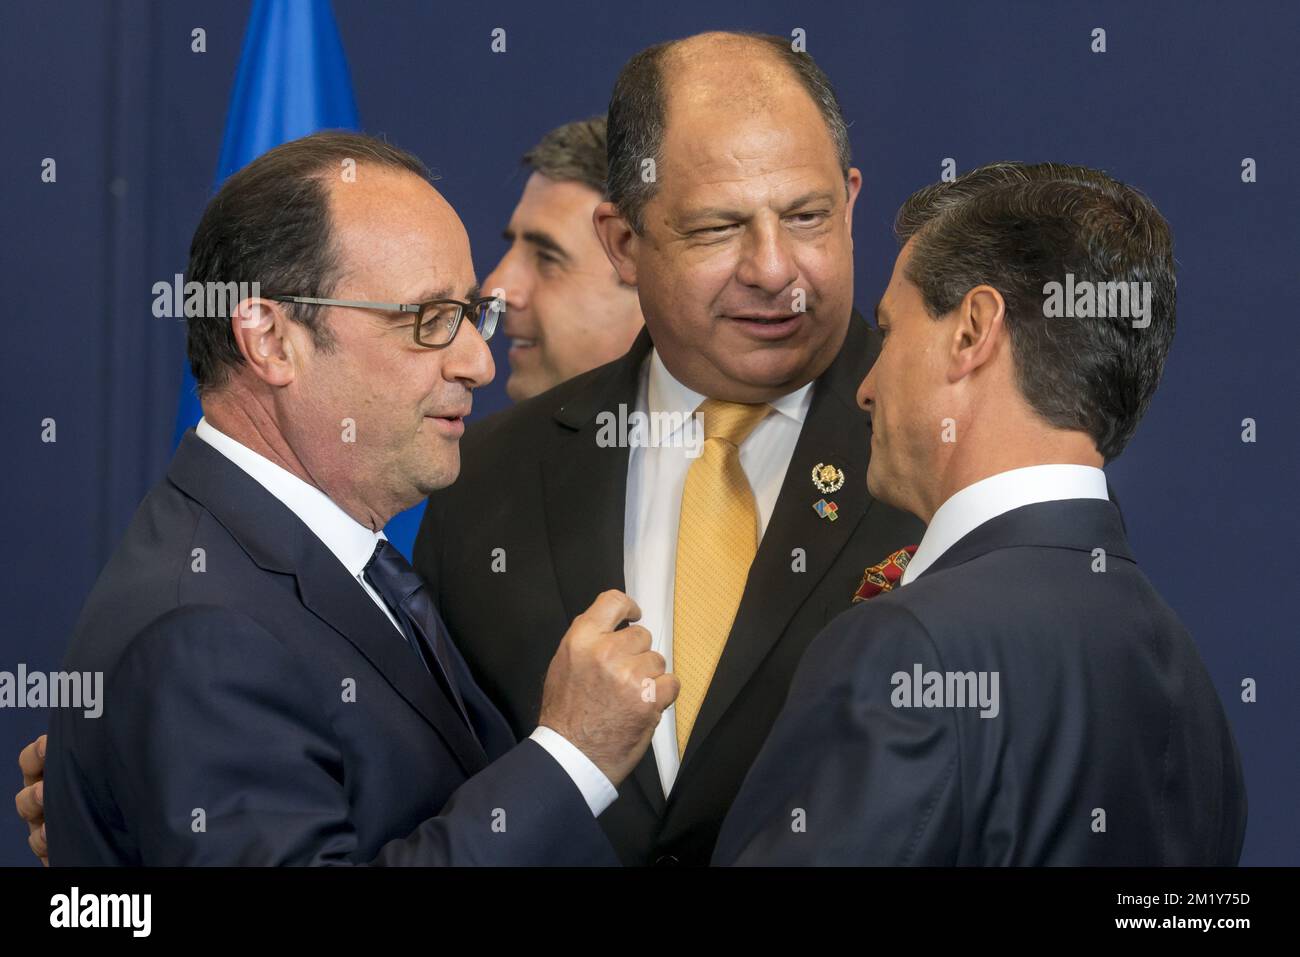 20150610 - BRUSSELS, BELGIUM: French President Francois Hollande, Costa Rica President Luis Guillermo Solis Rivera and Mexico President Enrique Pena Nieto pictured at the family picture opportunity, on the first day of the EU-CELAC summit meeting, Wednesday 10 June 2015, at the European union headquarters in Brussels. European Union and Latin America and the Caribbean hold a bi-regional Summit in Brussels. BELGA PHOTO POOL DANNY GYS Stock Photo